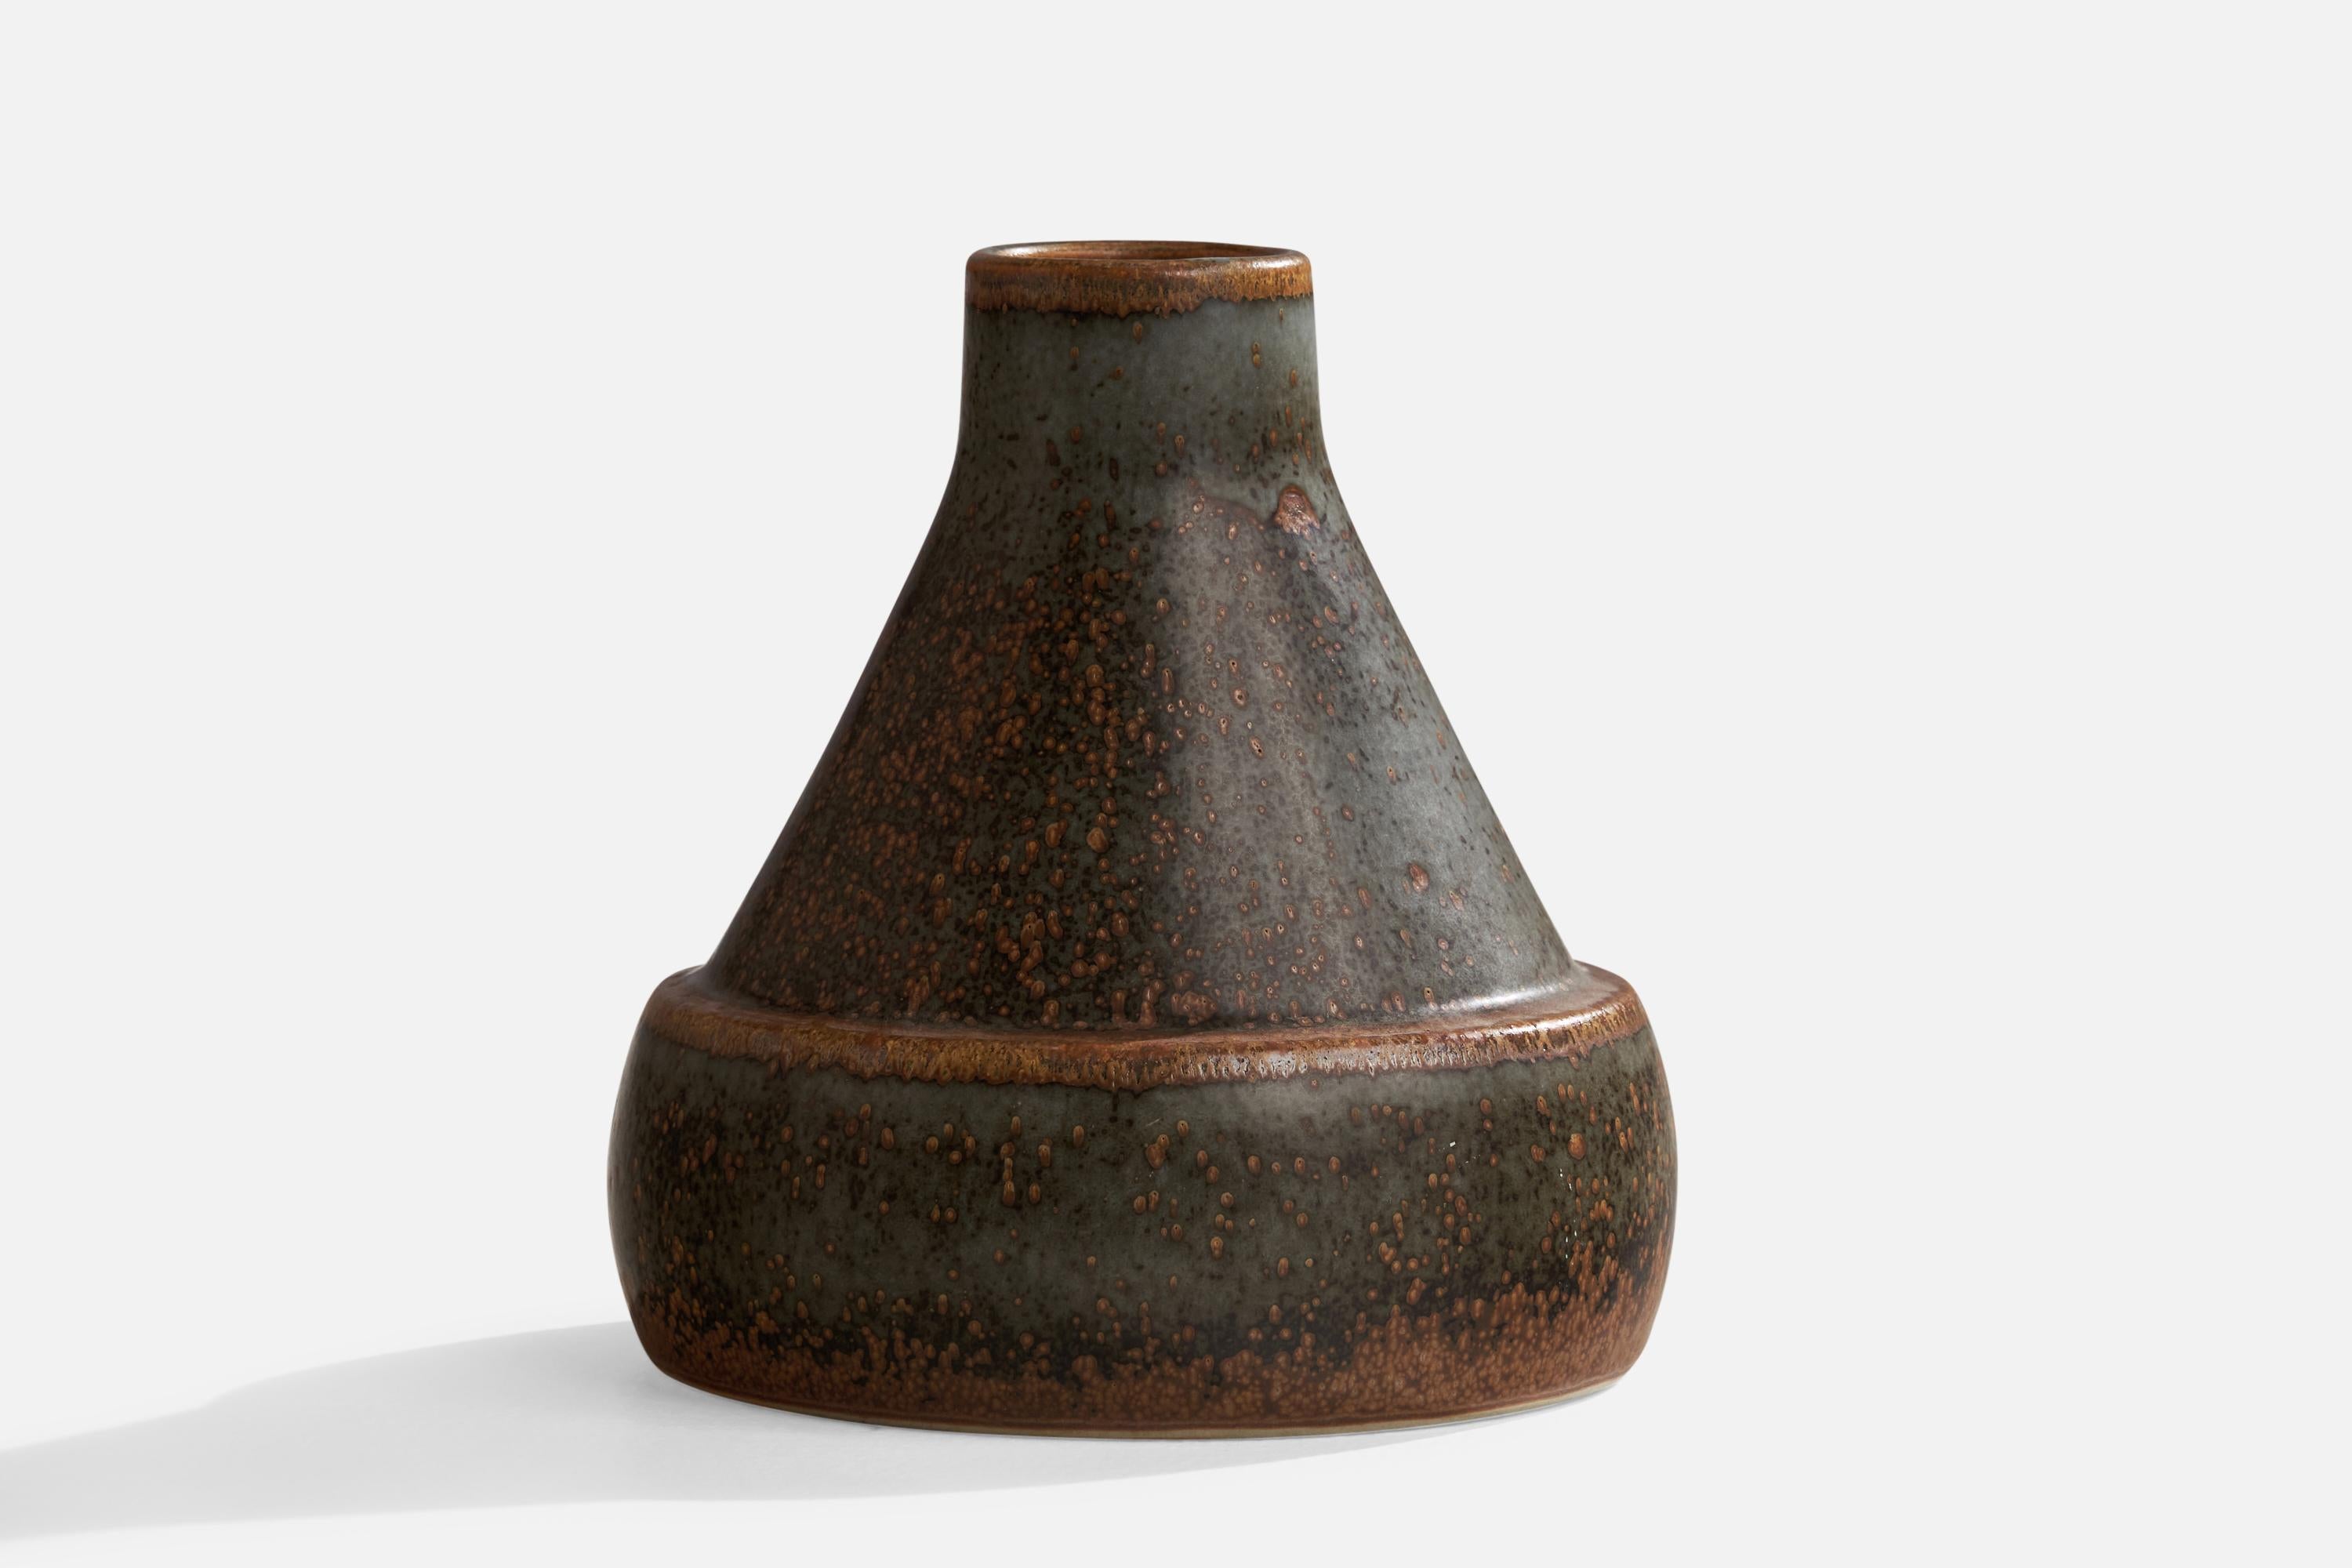 A unique black and brown-glazed stoneware vase designed by Carl-Harry Stålhane and produced by Rörstrand, Sweden, 1950s.